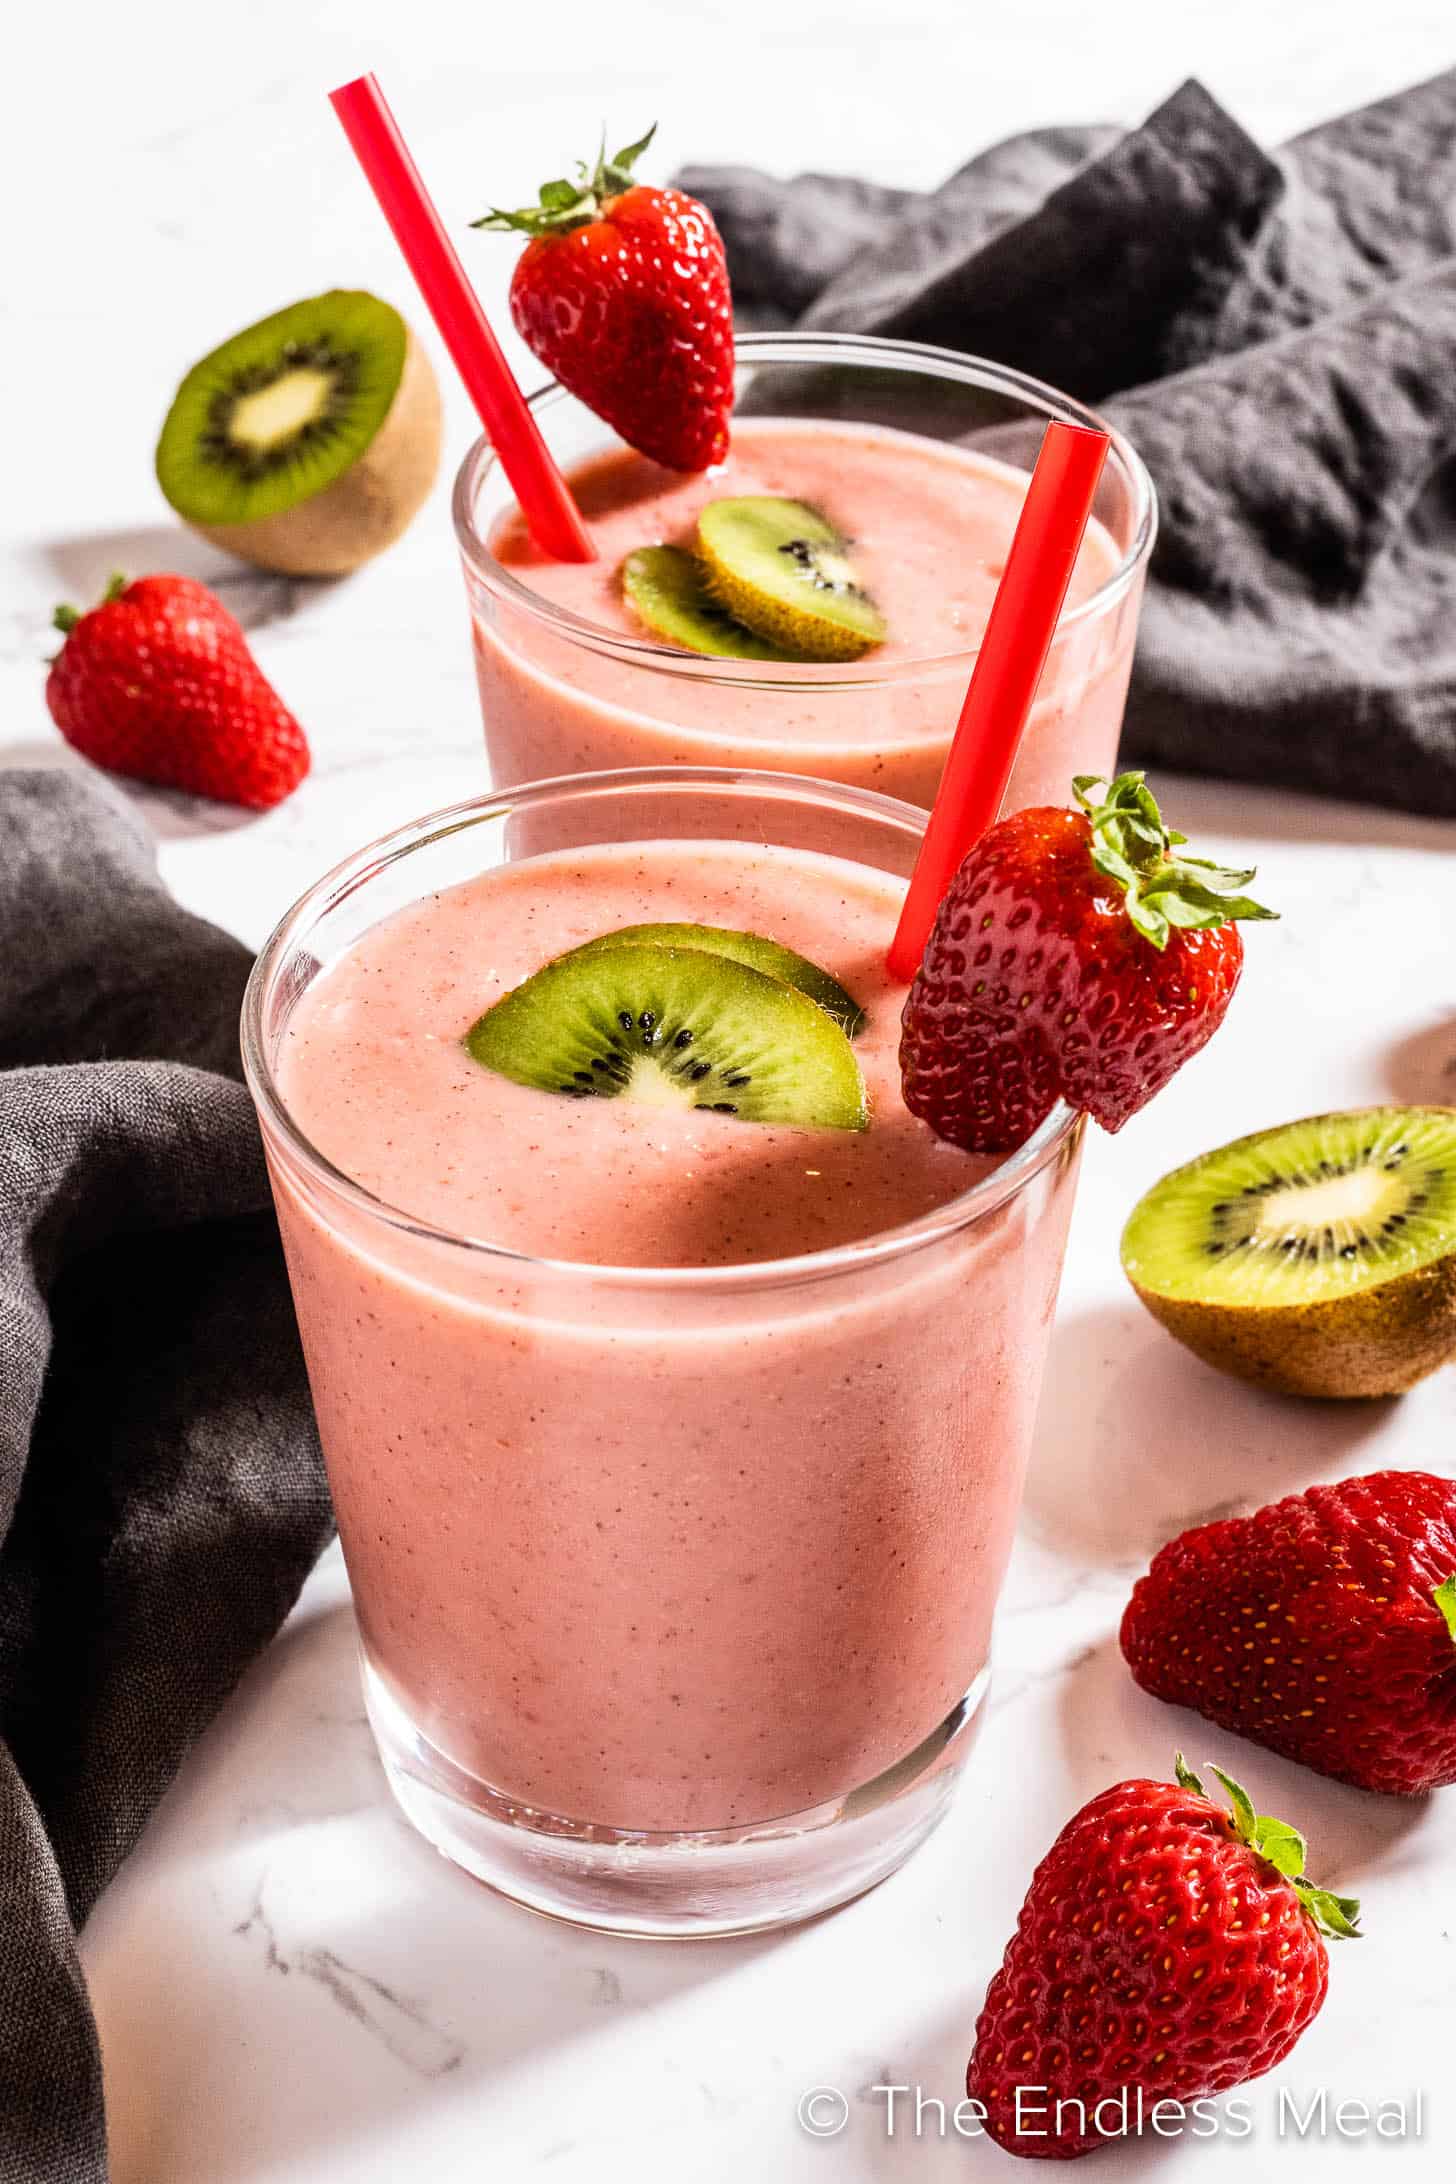 Strawberry Kiwi Smoothie in a glass with a red straw